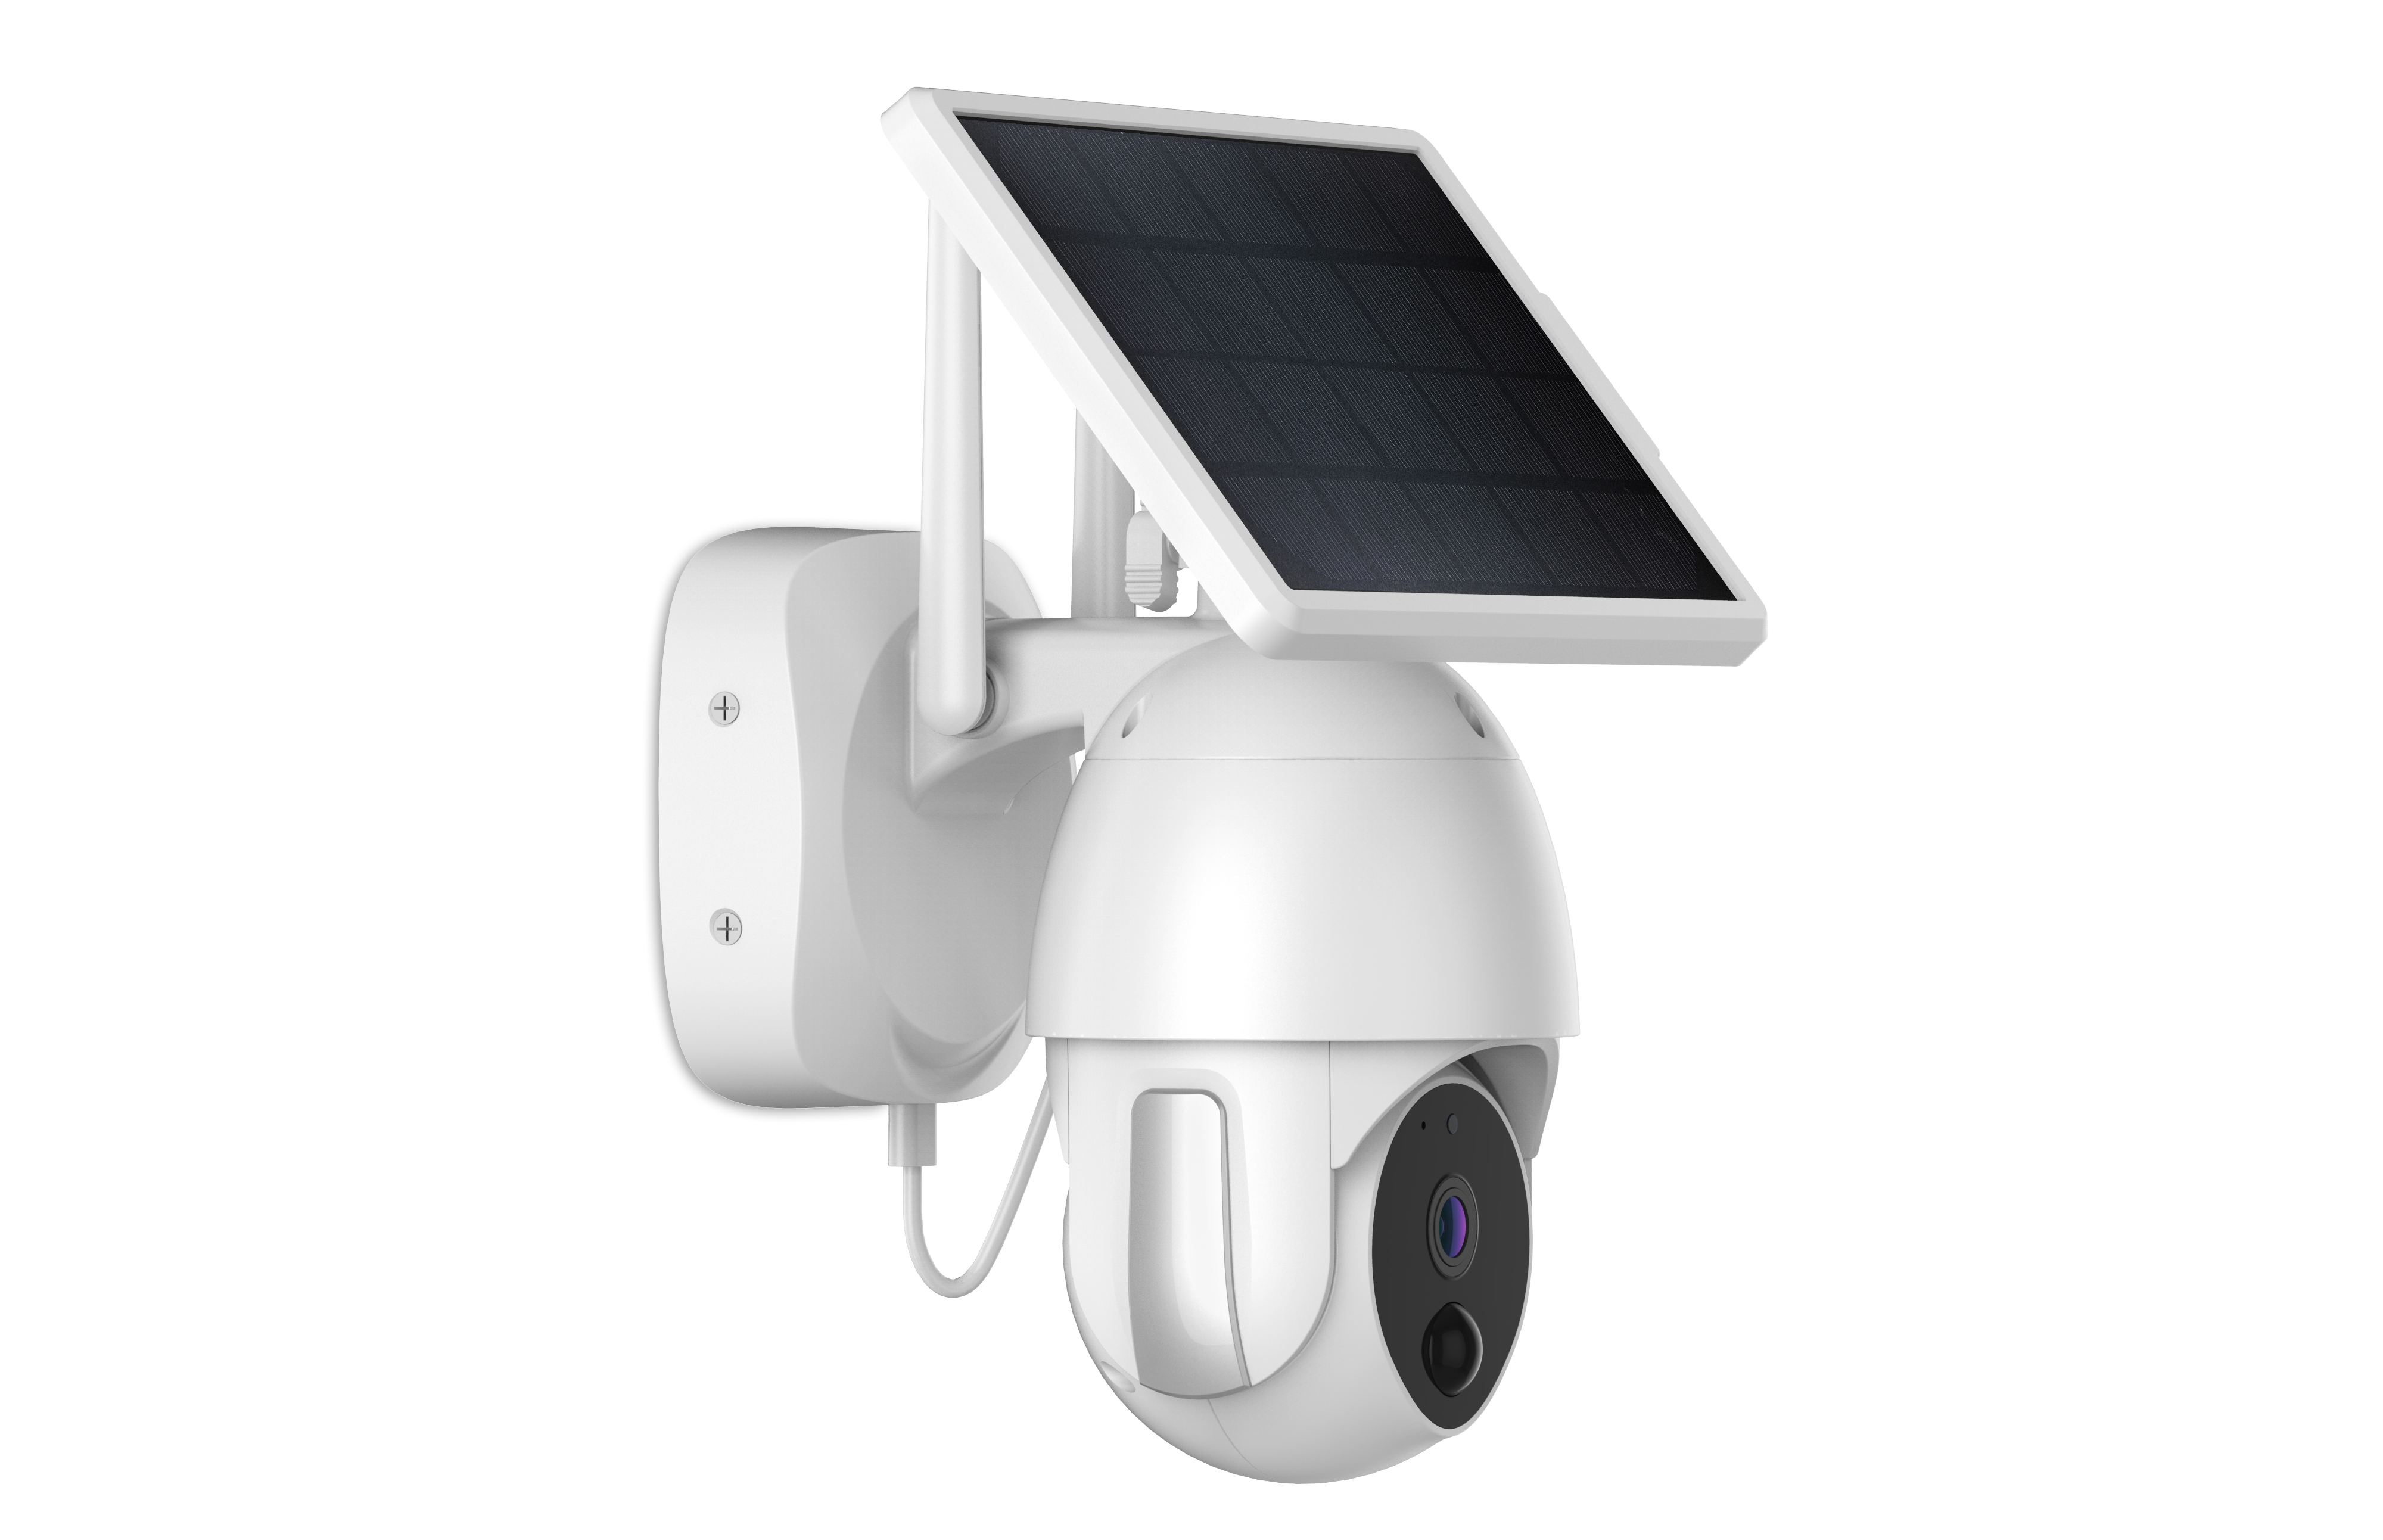 What style does outdoor surveillance camera use?